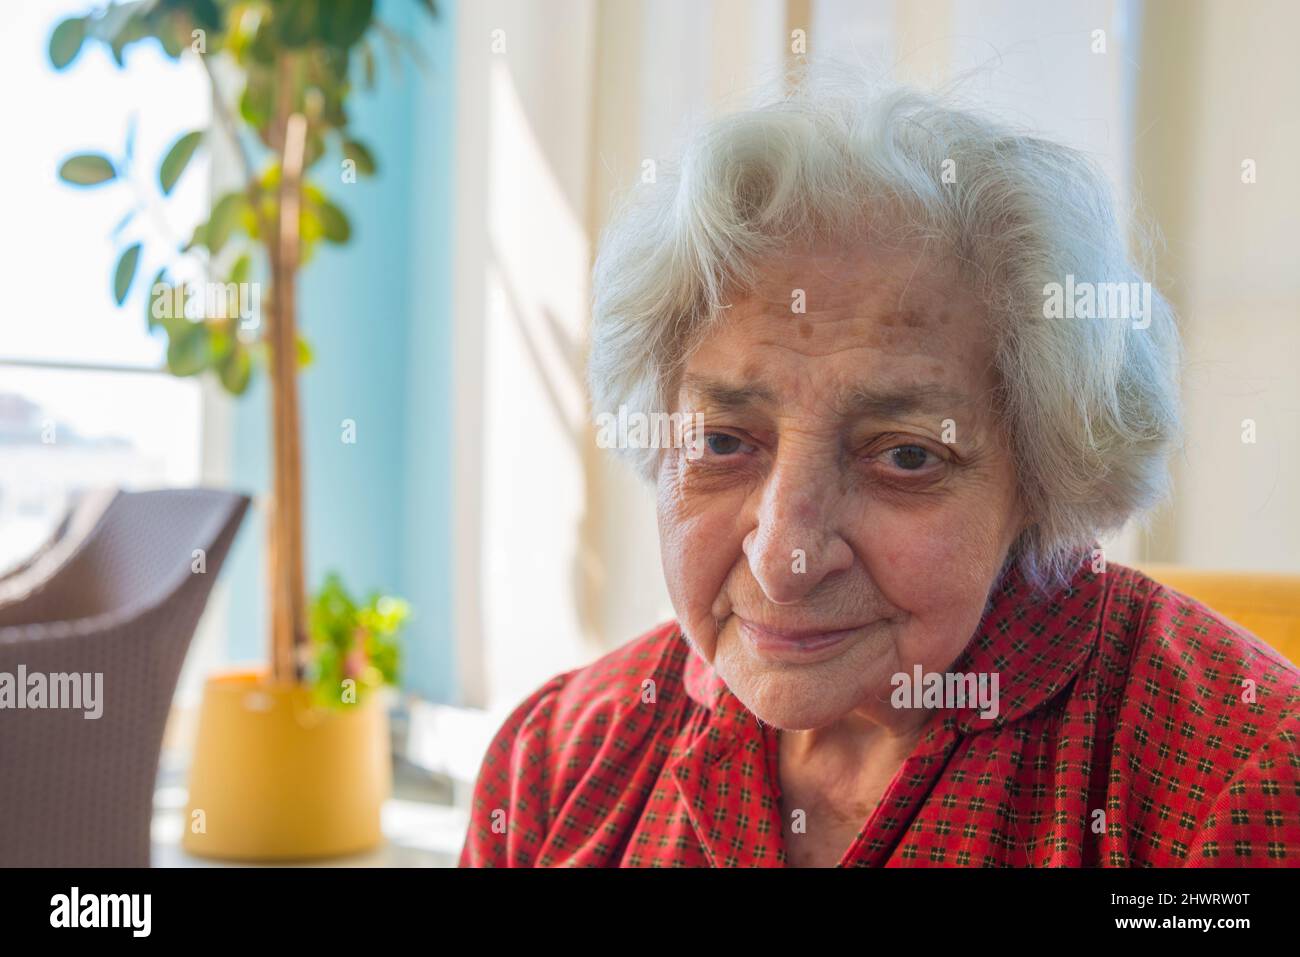 Elderly woman in a nursing home, looking at the camera. Stock Photo